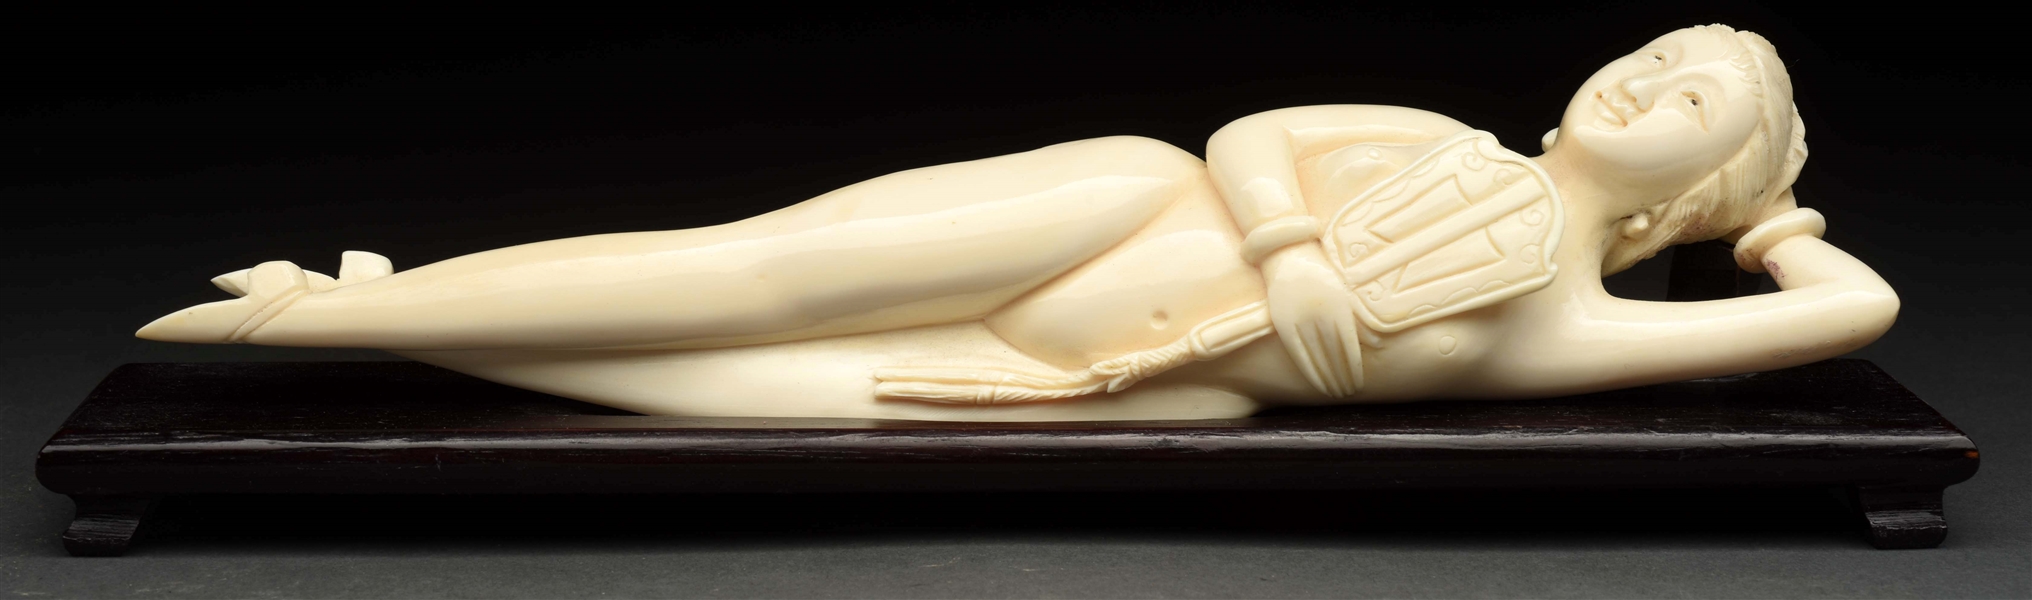 DOCTORS IVORY LADY ON WOODEN STAND. 